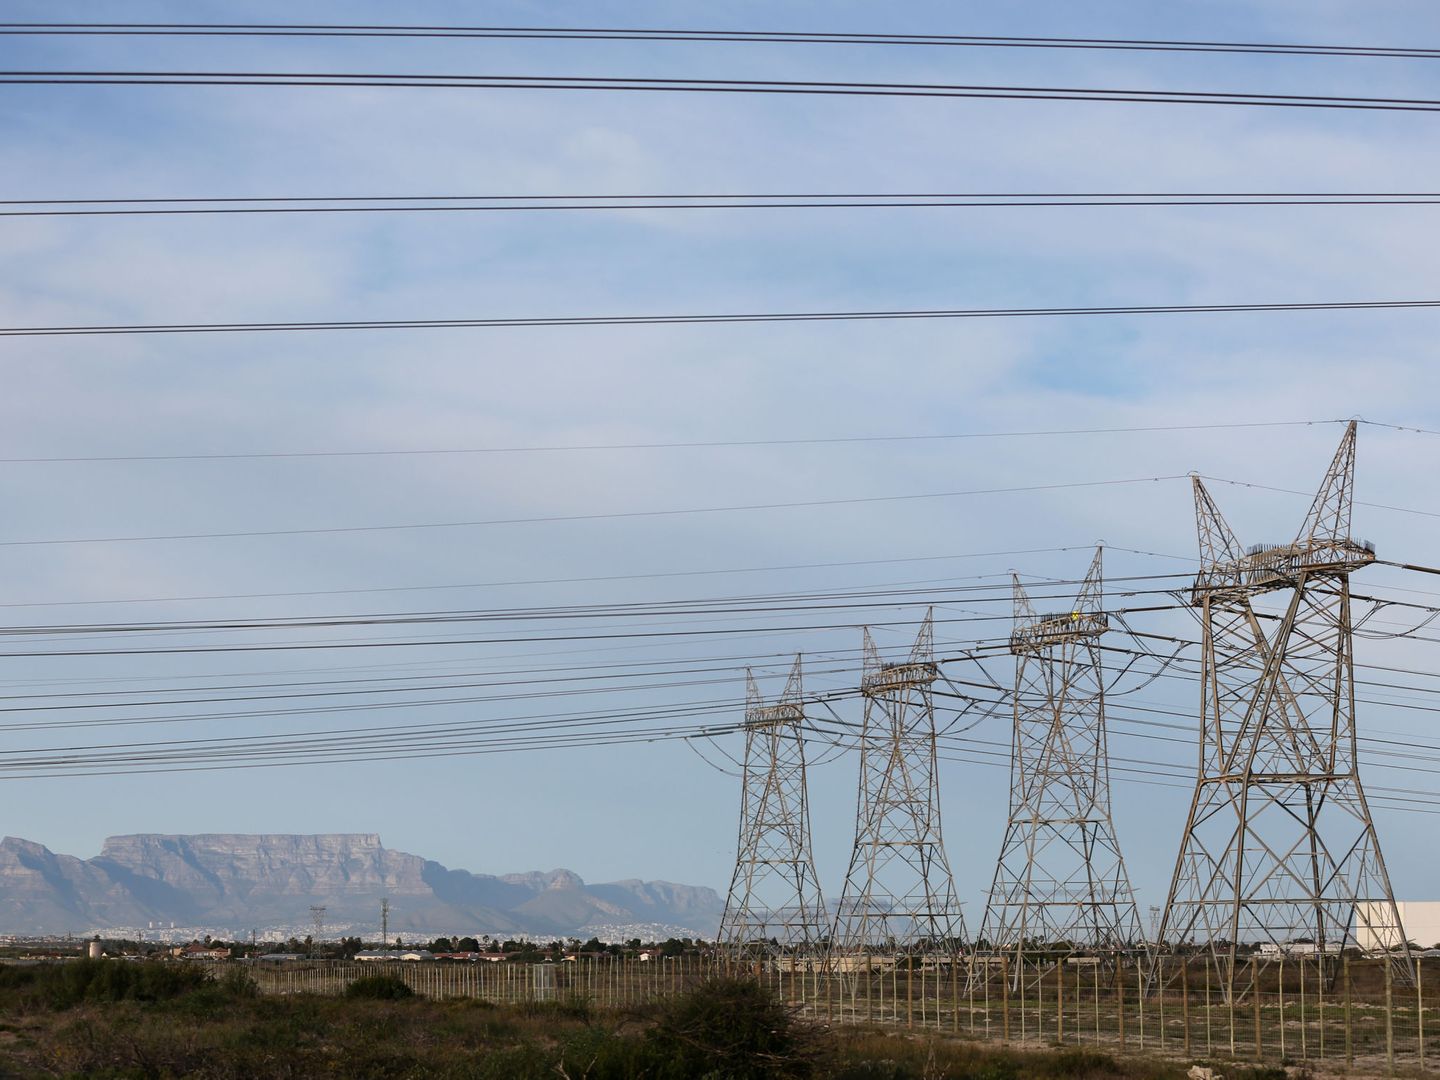 Electricity pylons carrying power from Koeberg nuclear power plant are seen in Cape Town, South Africa July 11, 2018. Picture taken July 11, 2018. REUTERS Sumaya Hisham